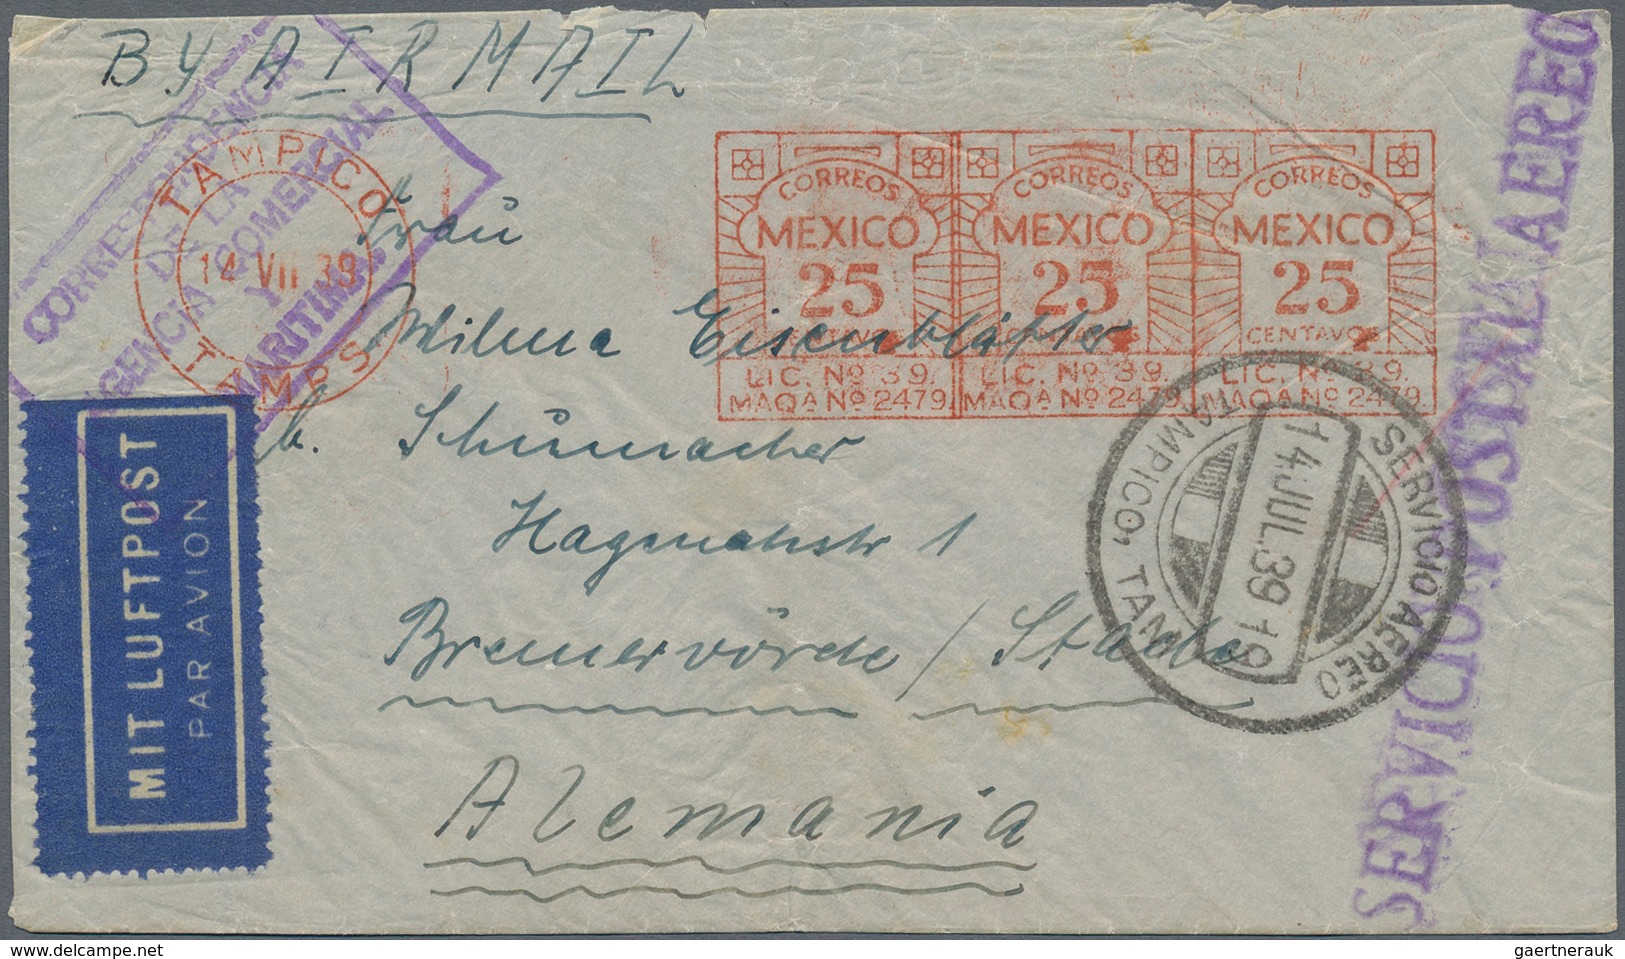 Mexiko - Ganzsachen: 1899/1981, ca. 64 covers/used ppc mostly to Europe or USA inc. censorship and r